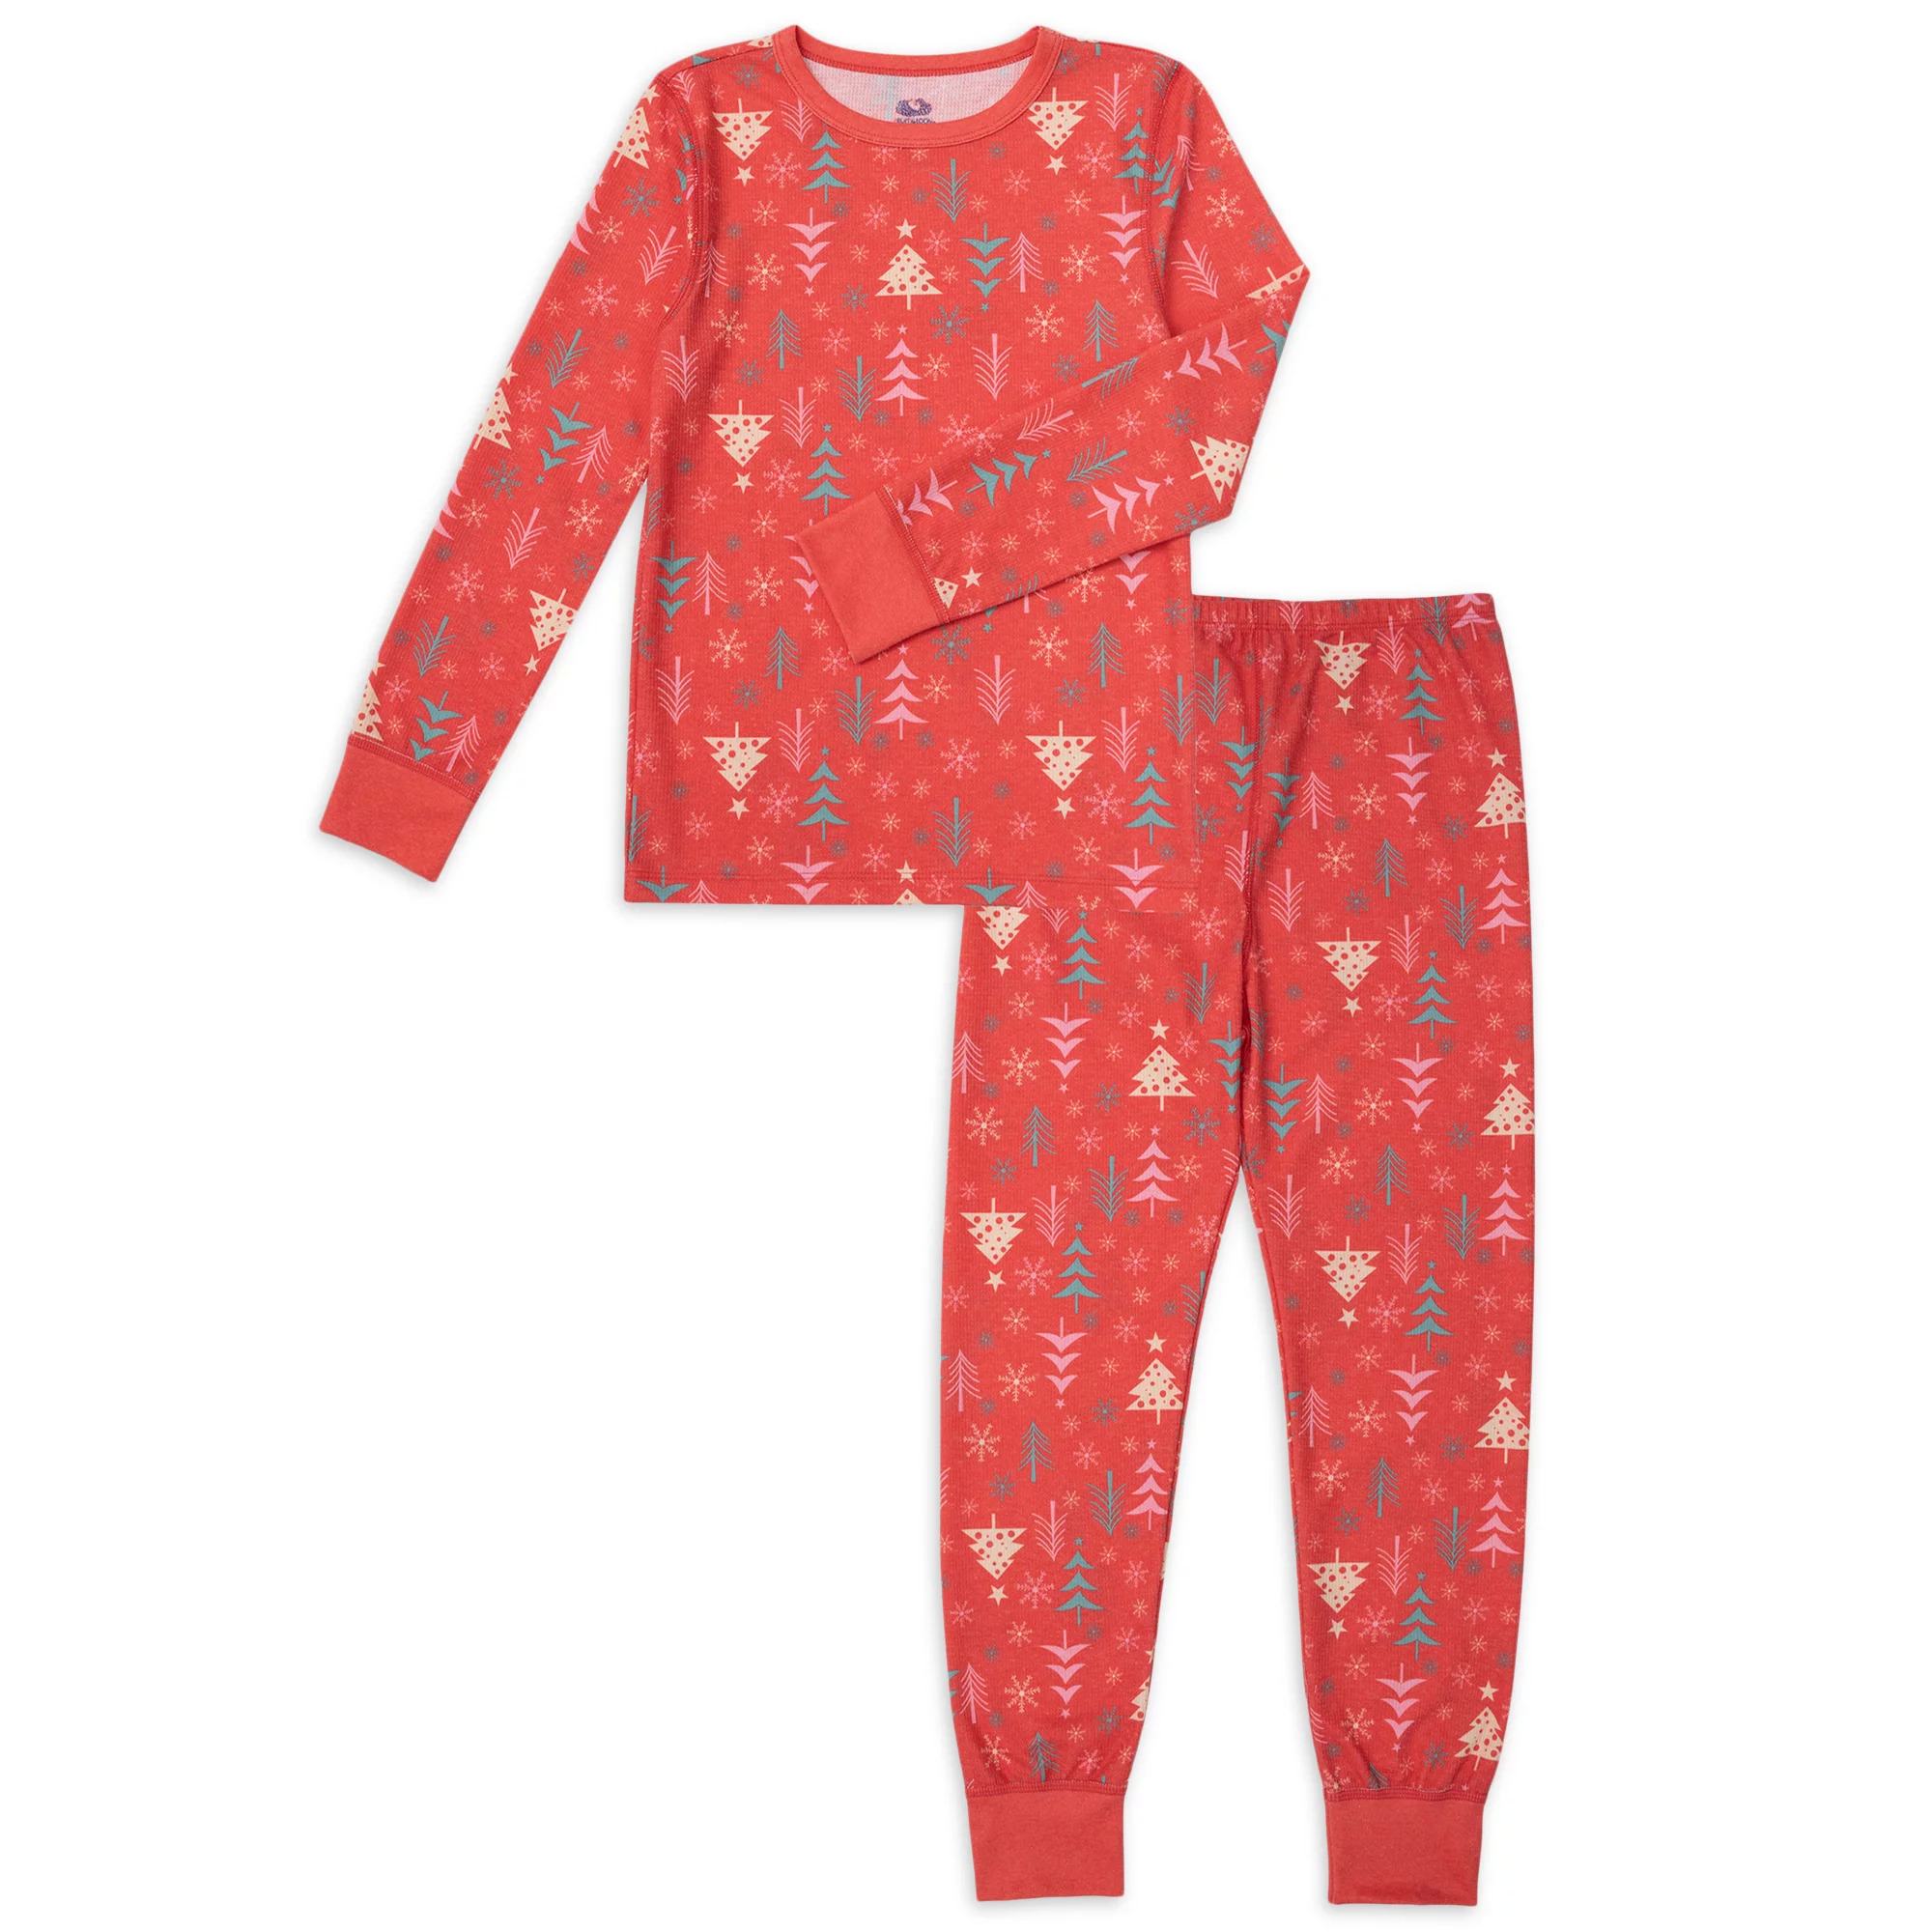 Fruit of the Loom Boy's & Girl's Holiday Thermal Top and Bottom Set (Red or Green, Sizes 4-18) $2.97 + Free S&H w/ Walmart+ or $35+